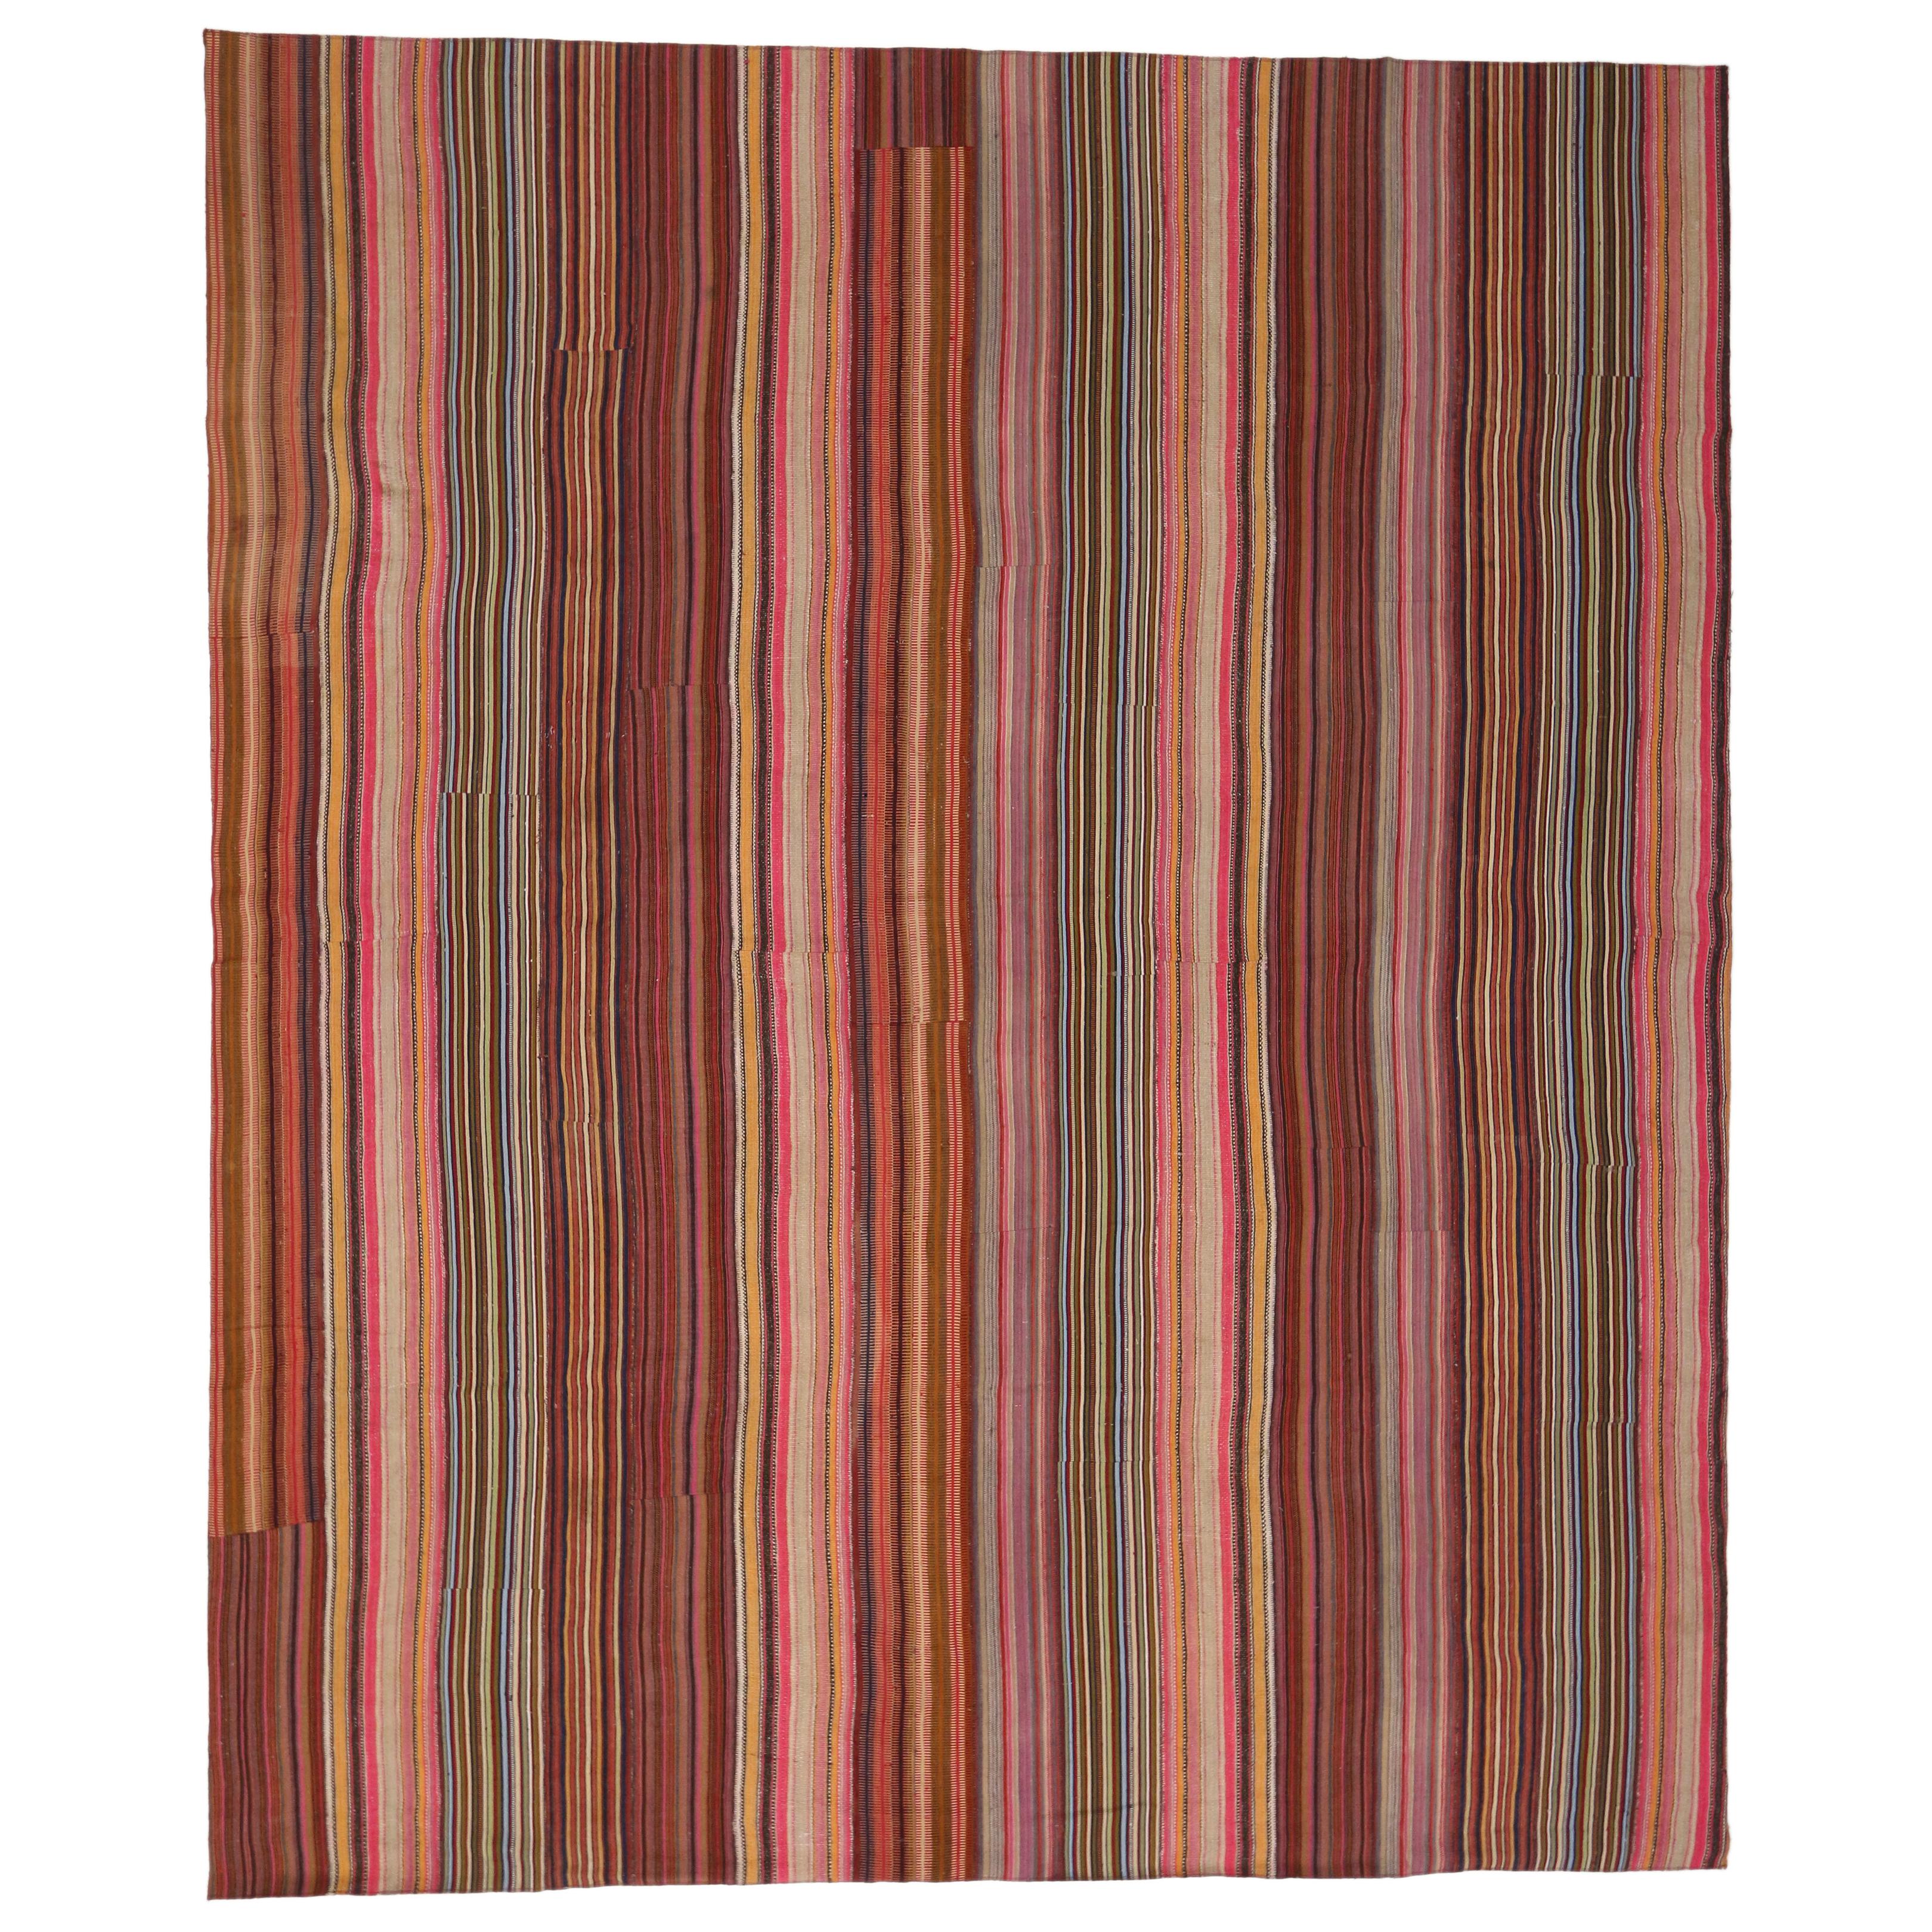 Vintage Turkish Striped Kilim Rug with Modern Rustic Cabin Style For Sale